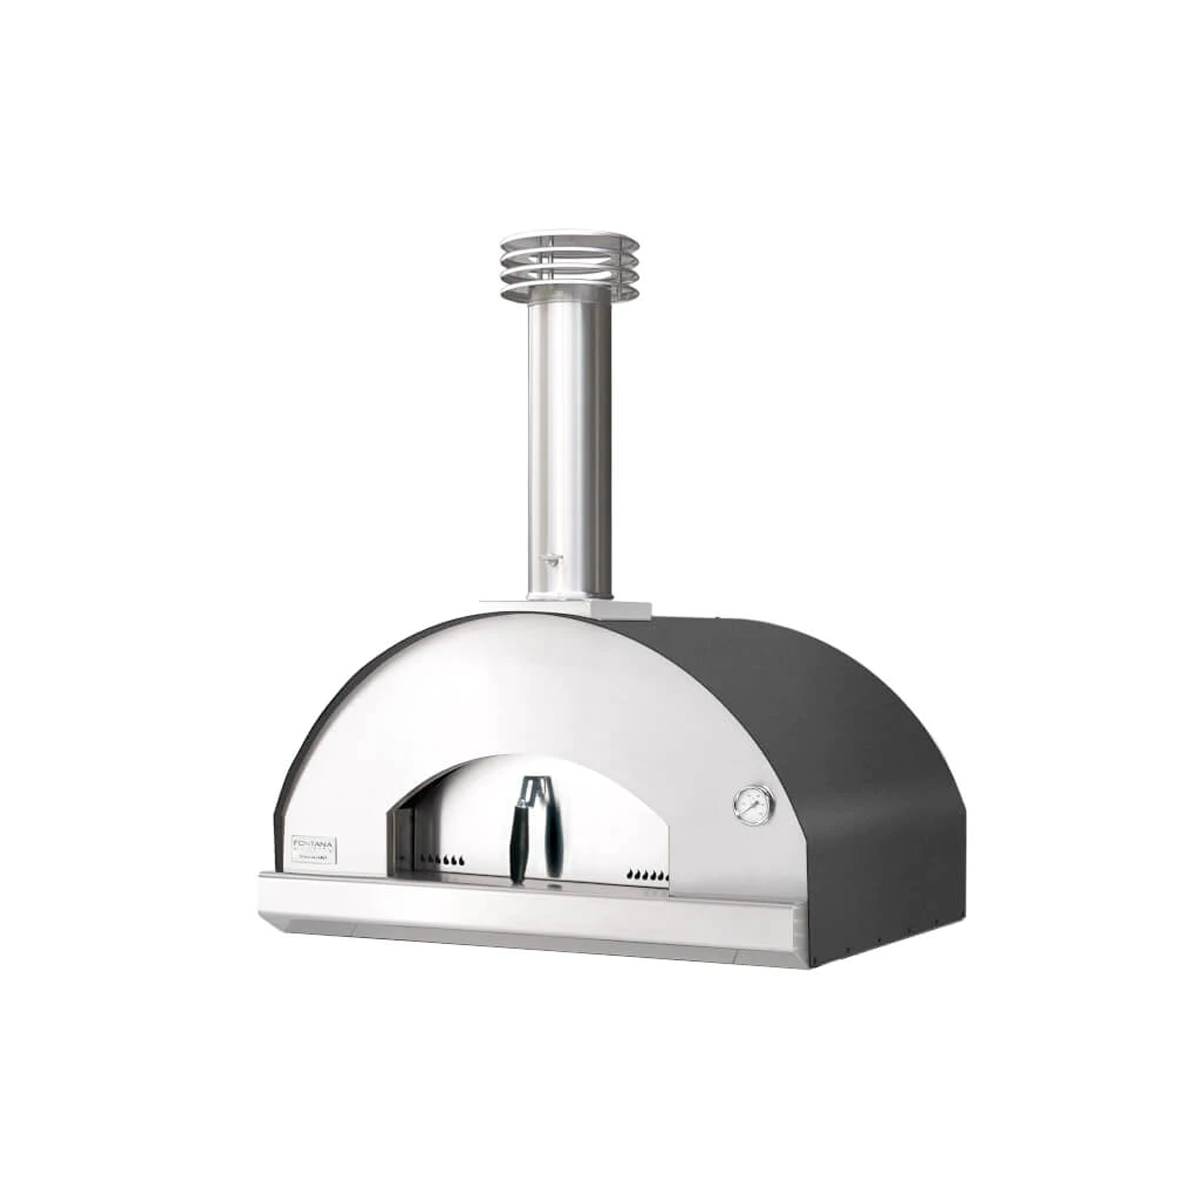 The Mangiafuoco Wood Countertop Pizza Oven